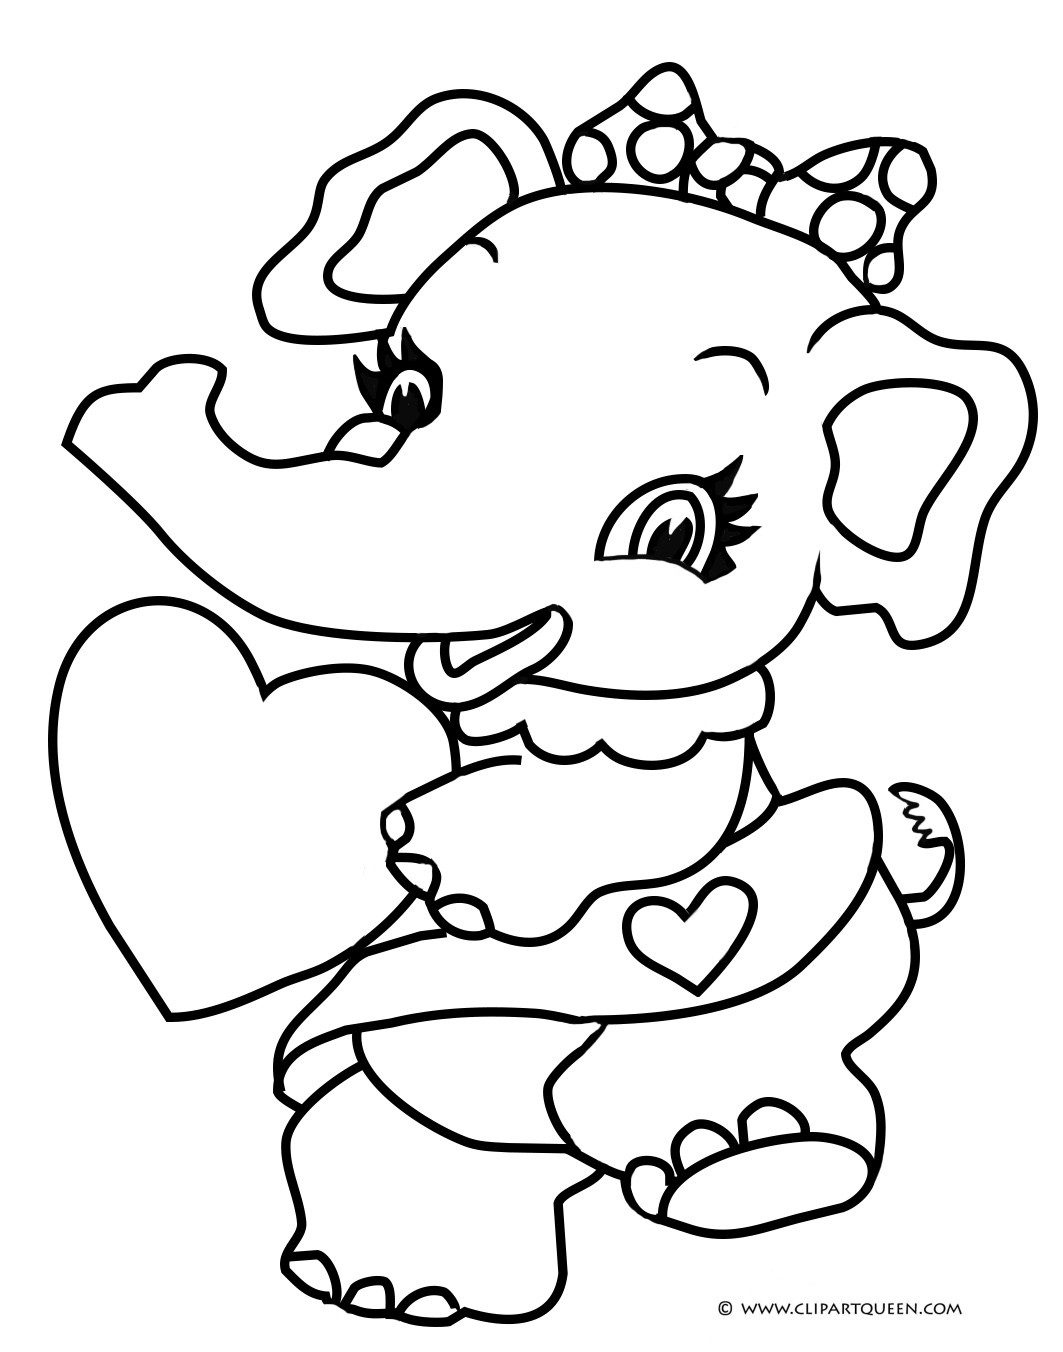 Valentines Coloring Pages For Girls
 13 Valentine s Day coloring pages